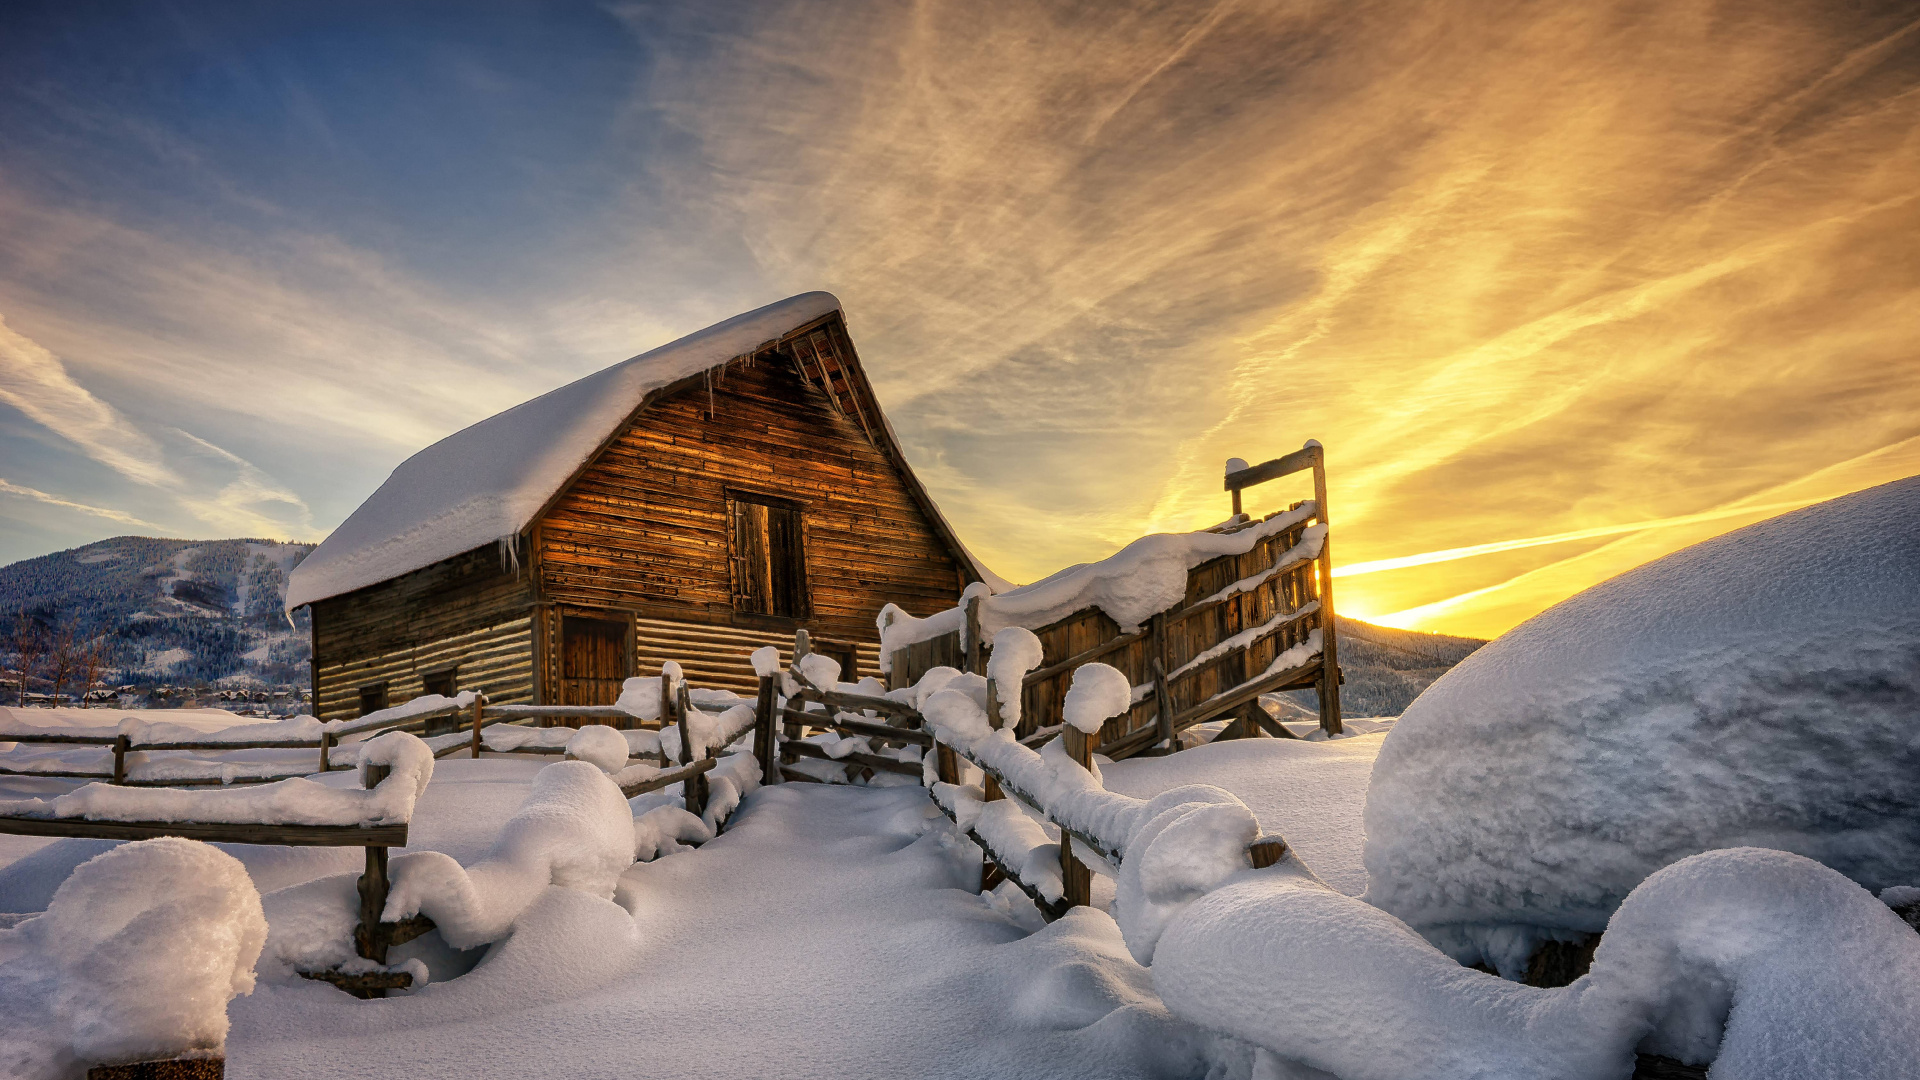 Brown Wooden House Covered by Snow Under Cloudy Sky. Wallpaper in 1920x1080 Resolution